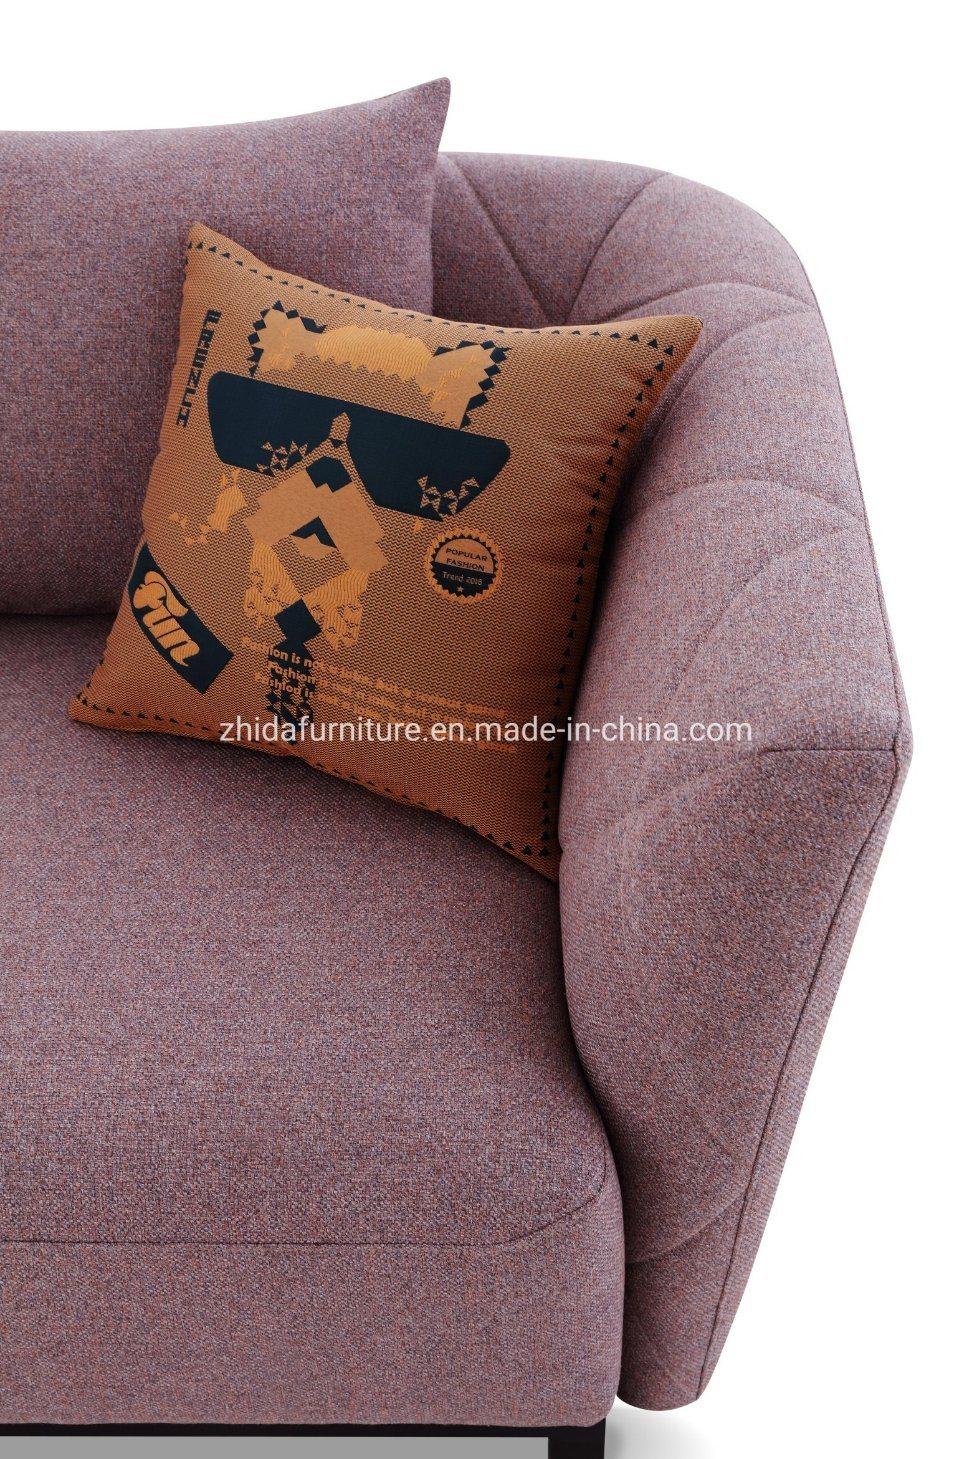 Modern Pink Fabric L Shape Upholstery Fabric Wooden Leg Home Living Room Sofa for Hotel Villa Apartment Furniture